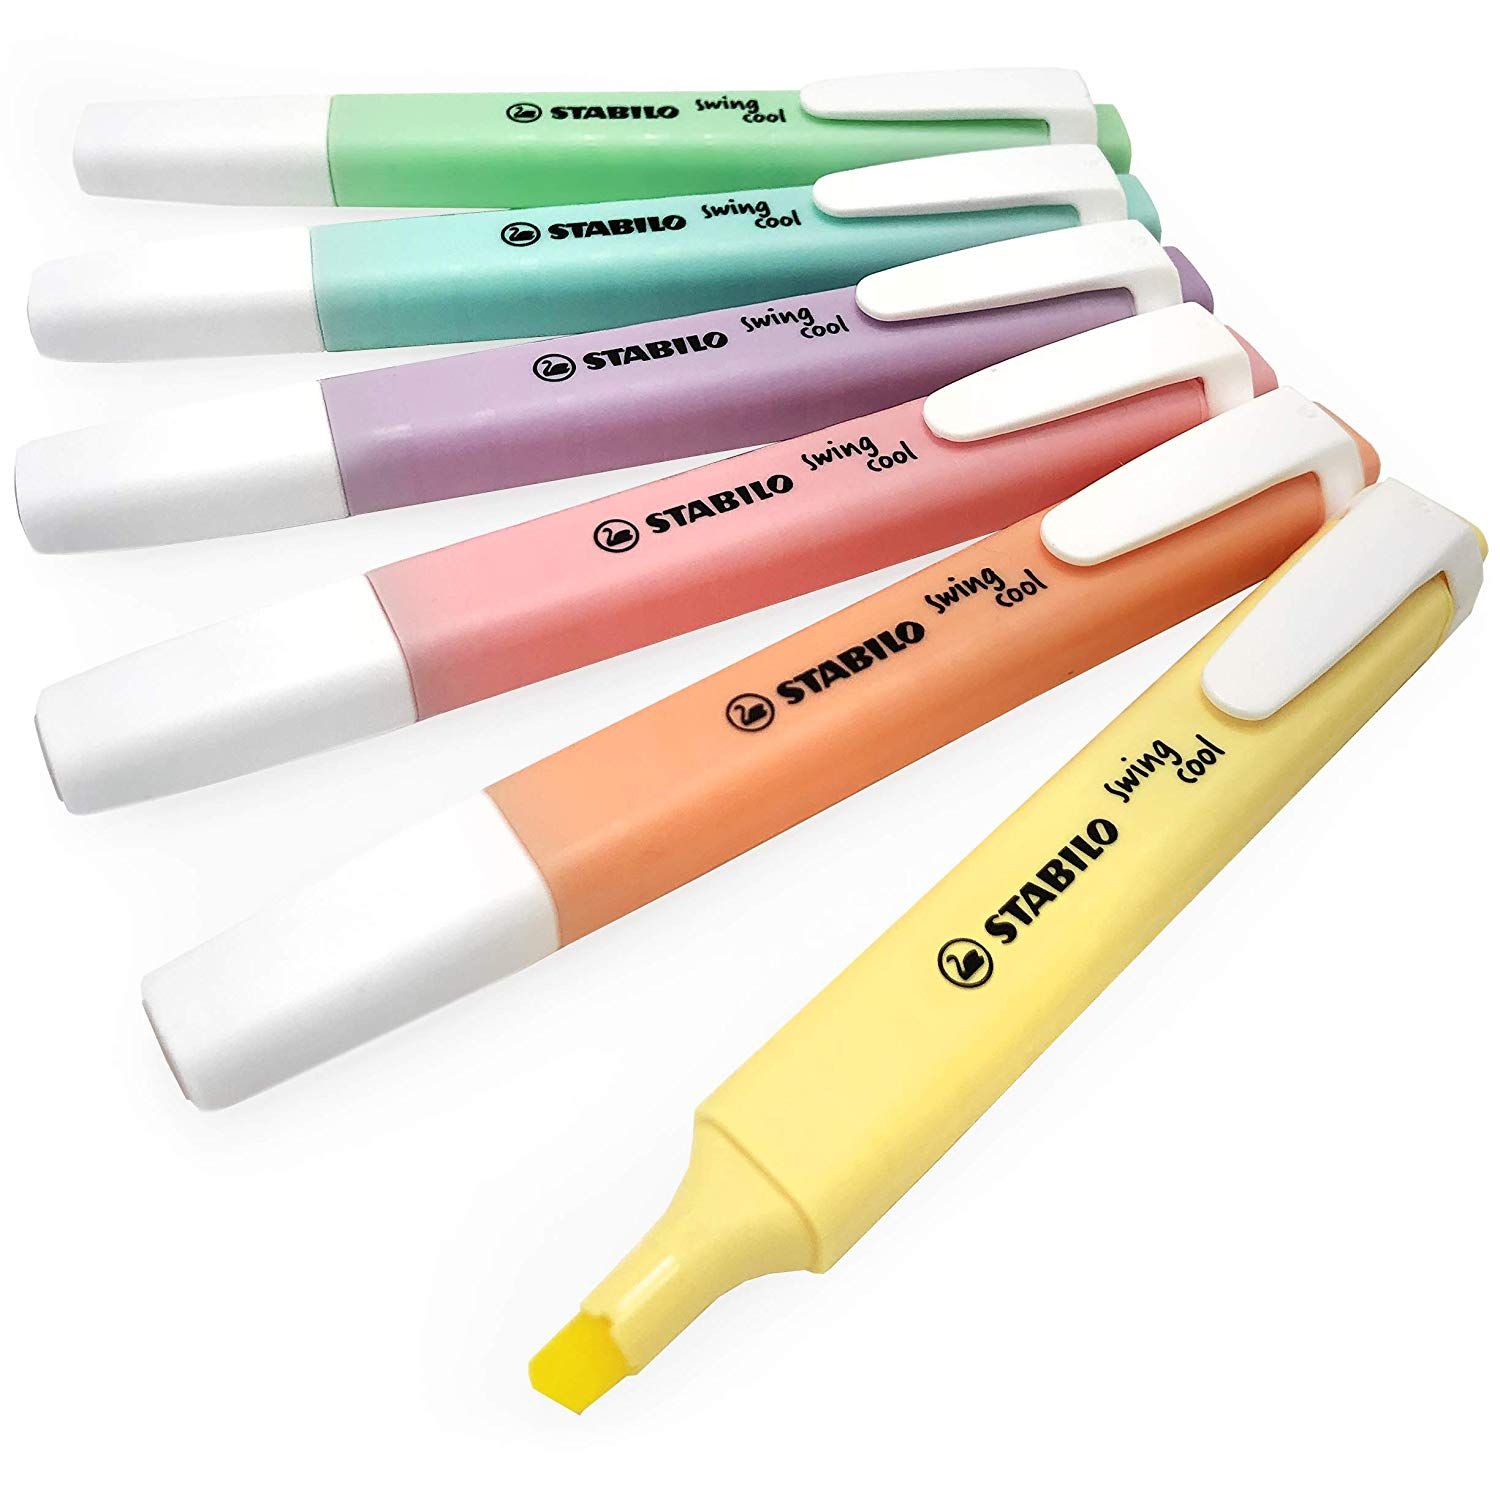 STABILO Swing Cool Highlighter Pen, Pocket Sized Pastel Color Marker, 1+4mm  Highlighting Drawing Painting